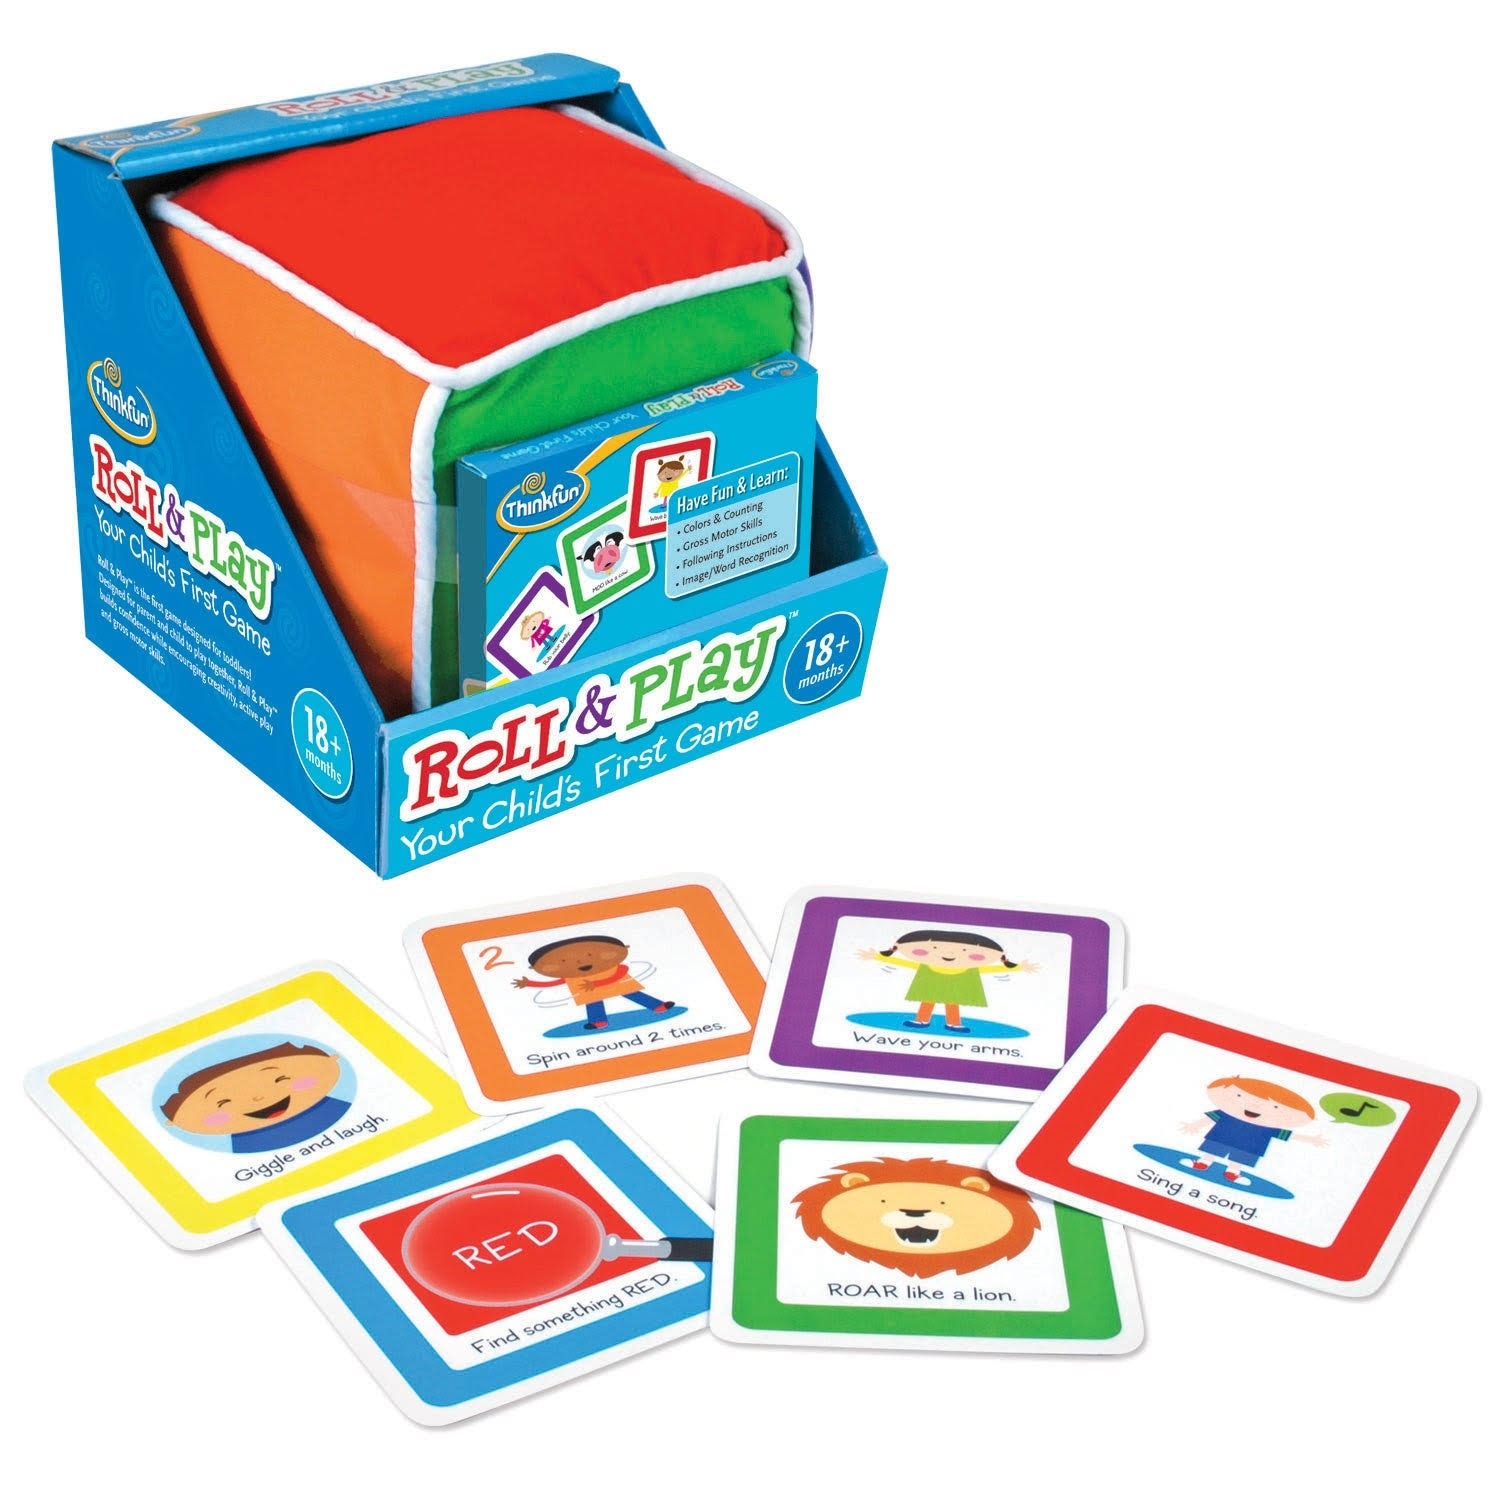 Think Fun Roll and Play Pre School Game